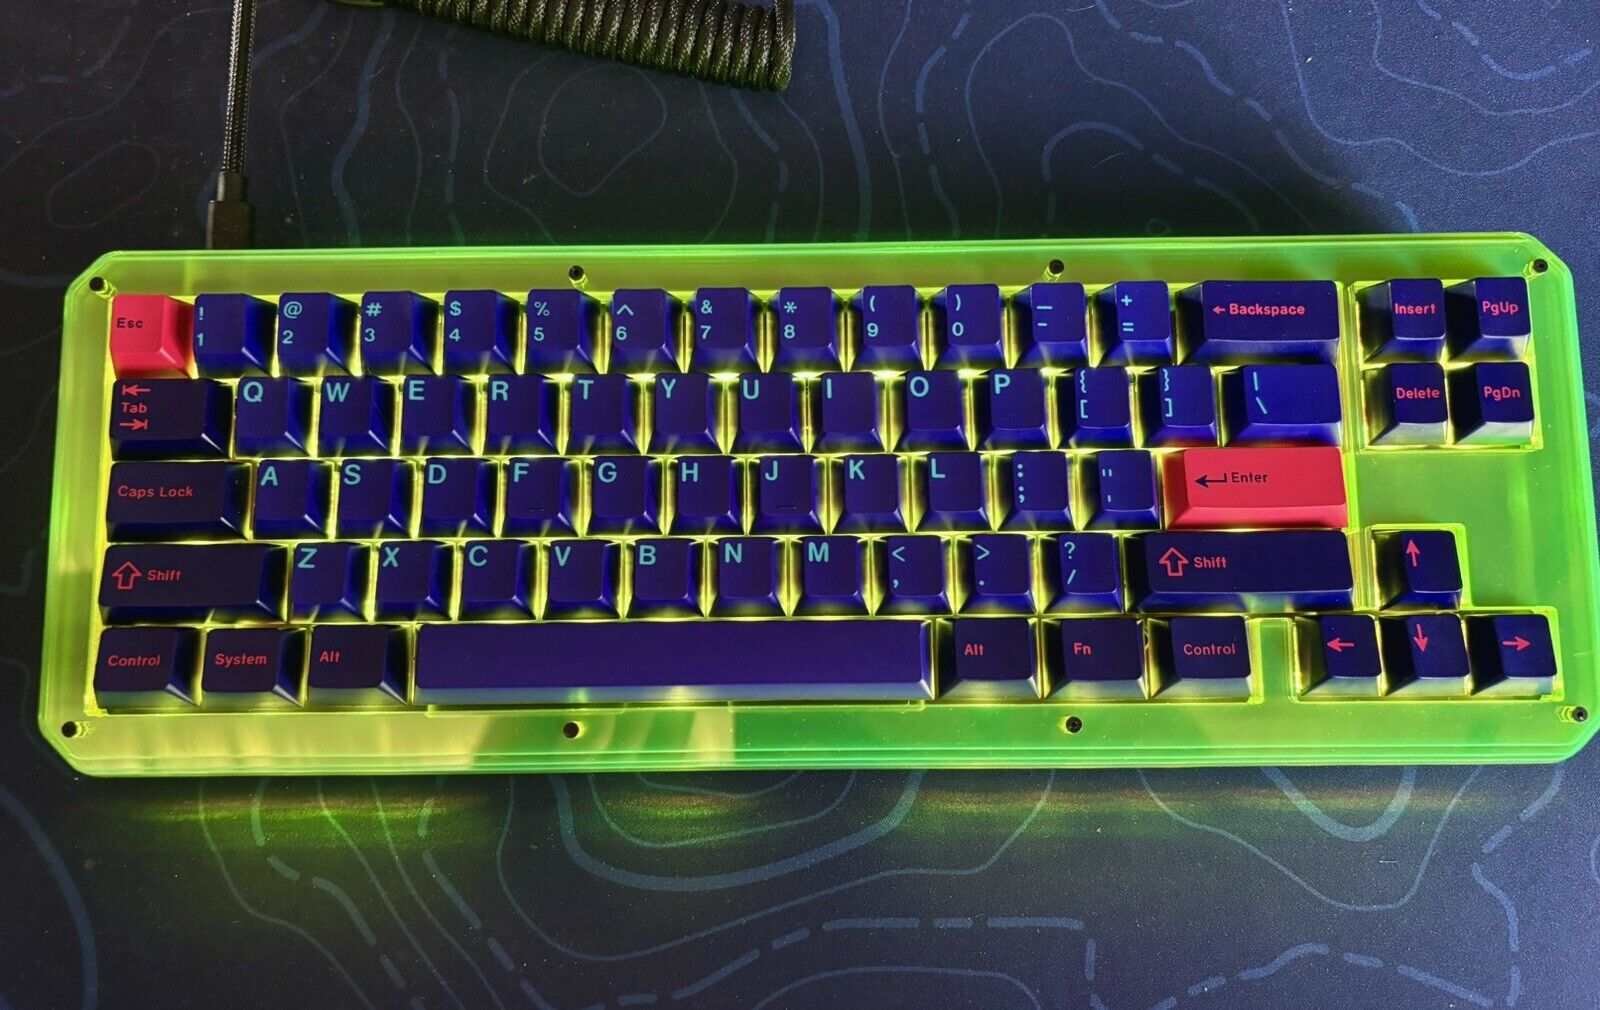 Stellar65 Mechanical Keyboard With GMK Laser Keycaps and NK Silk Linears